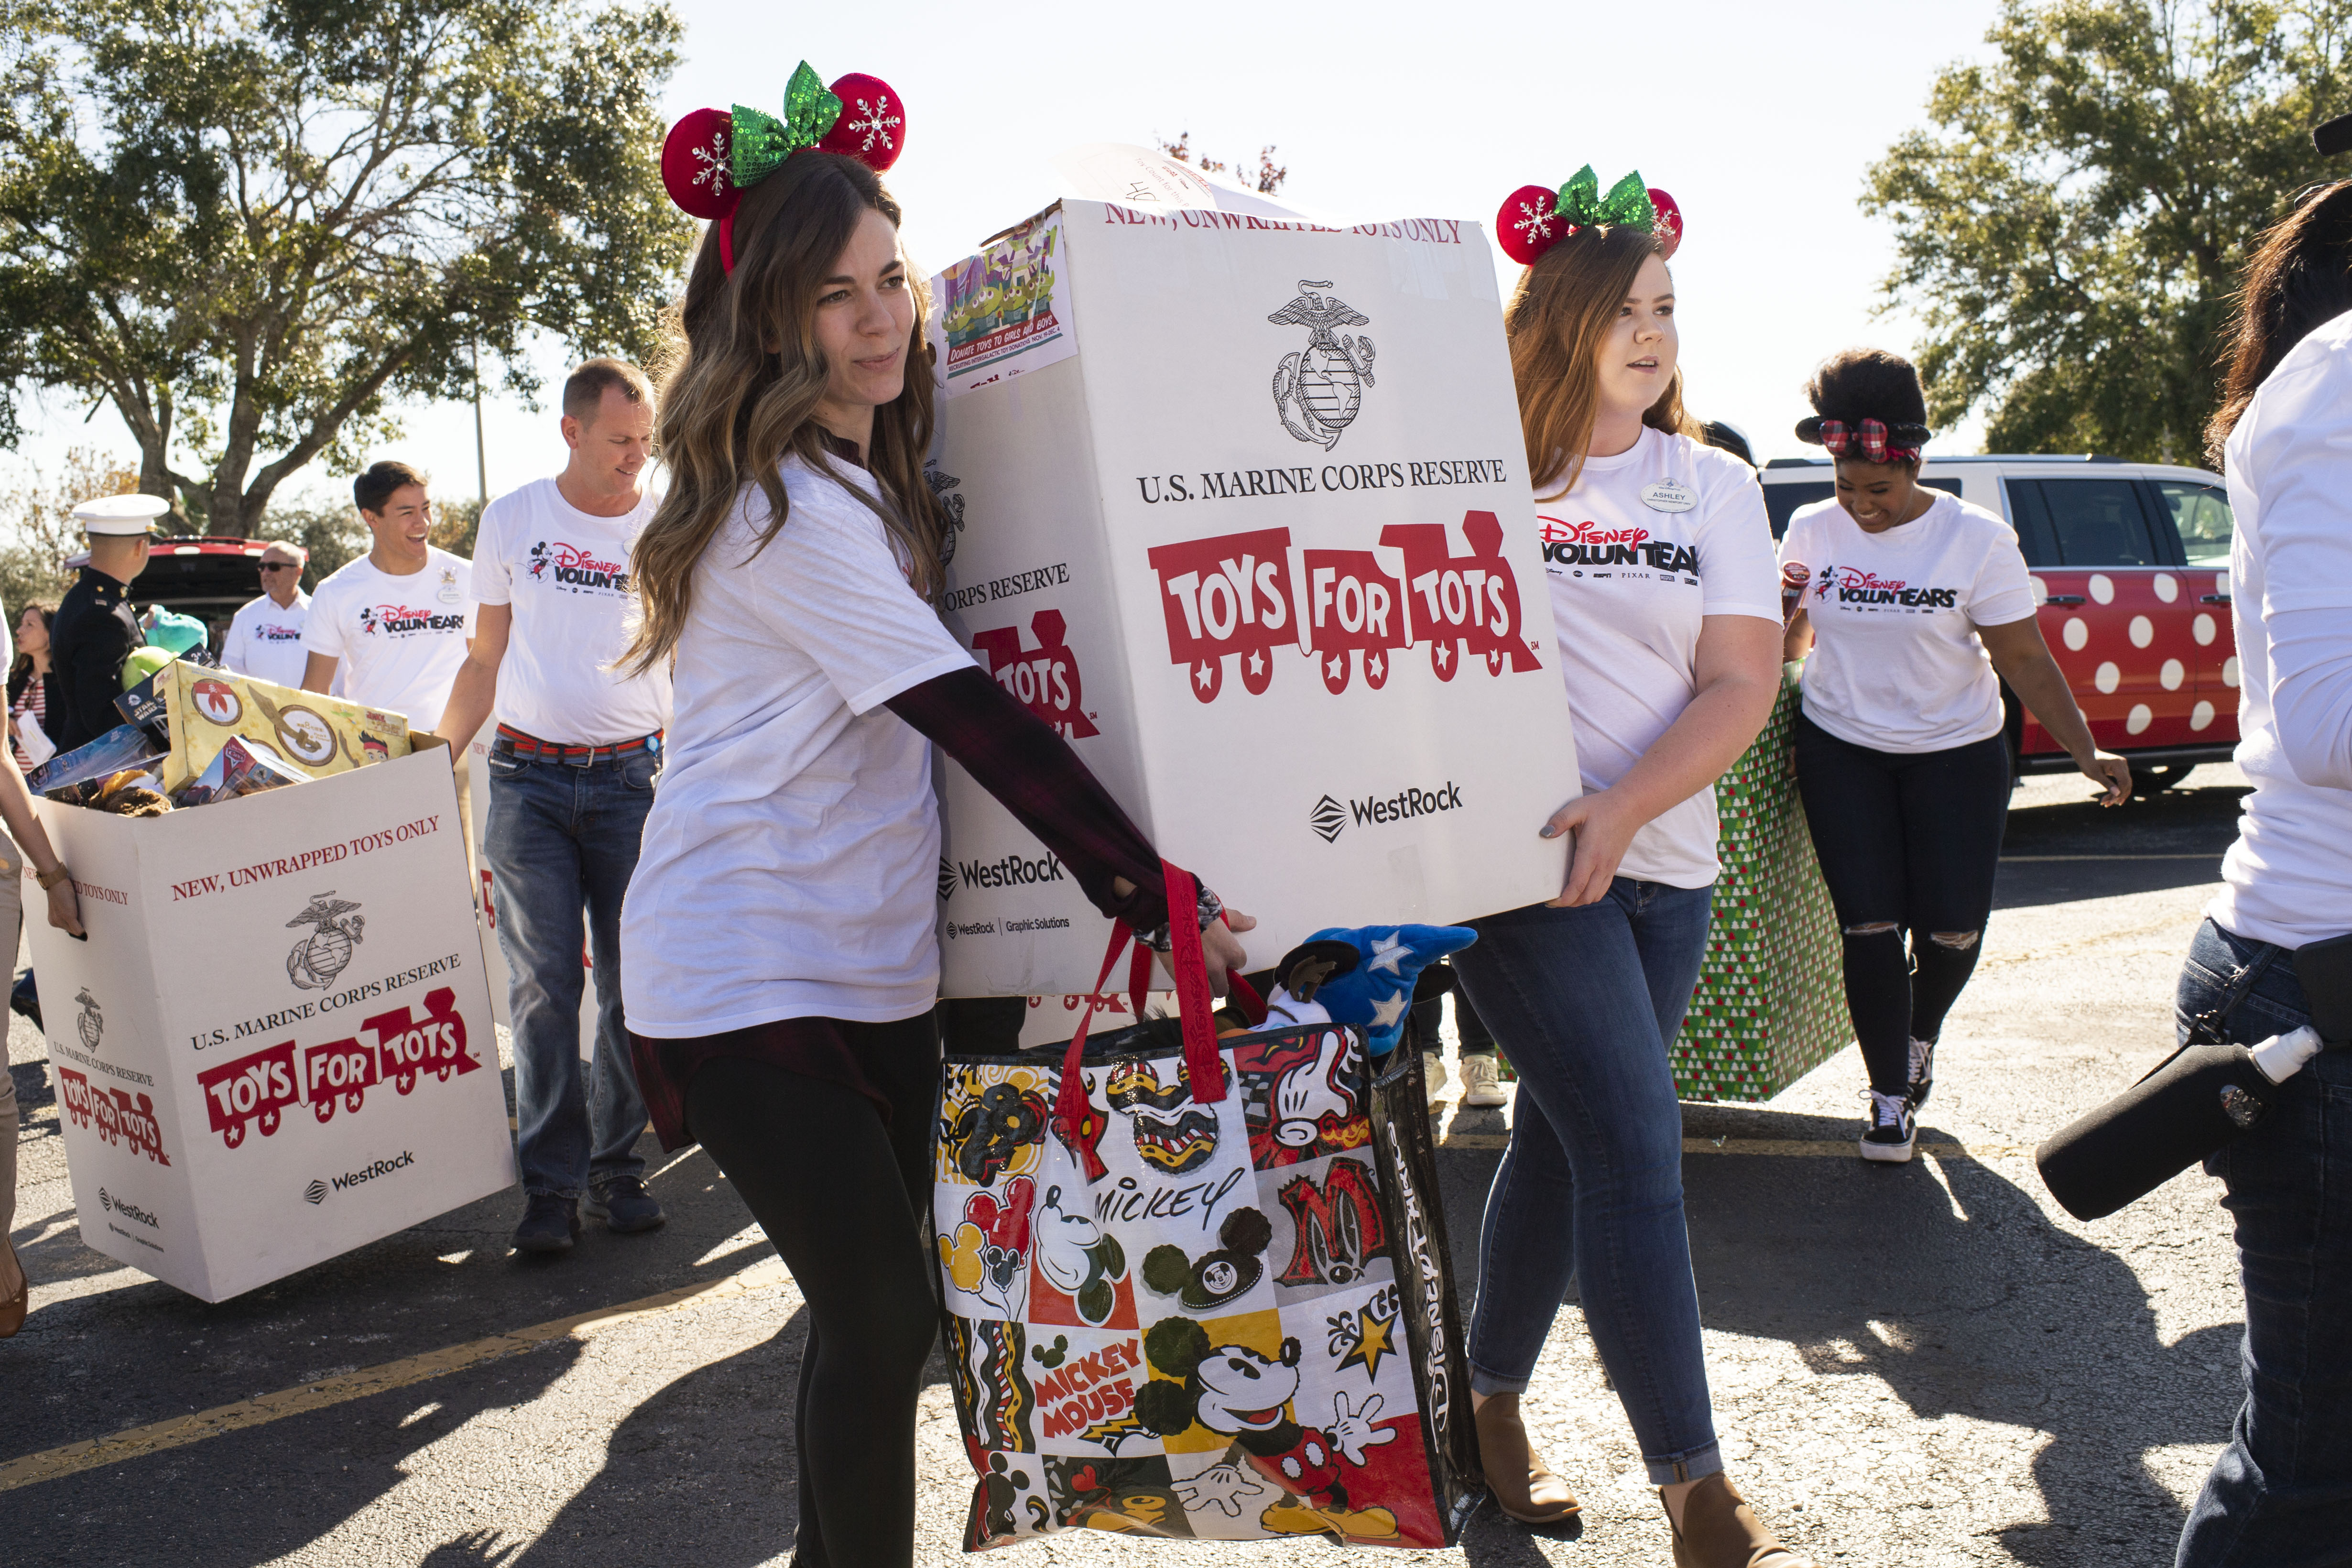 Thousands of Toys Donated by Walt Disney World Resort Cast Members Are Delivered